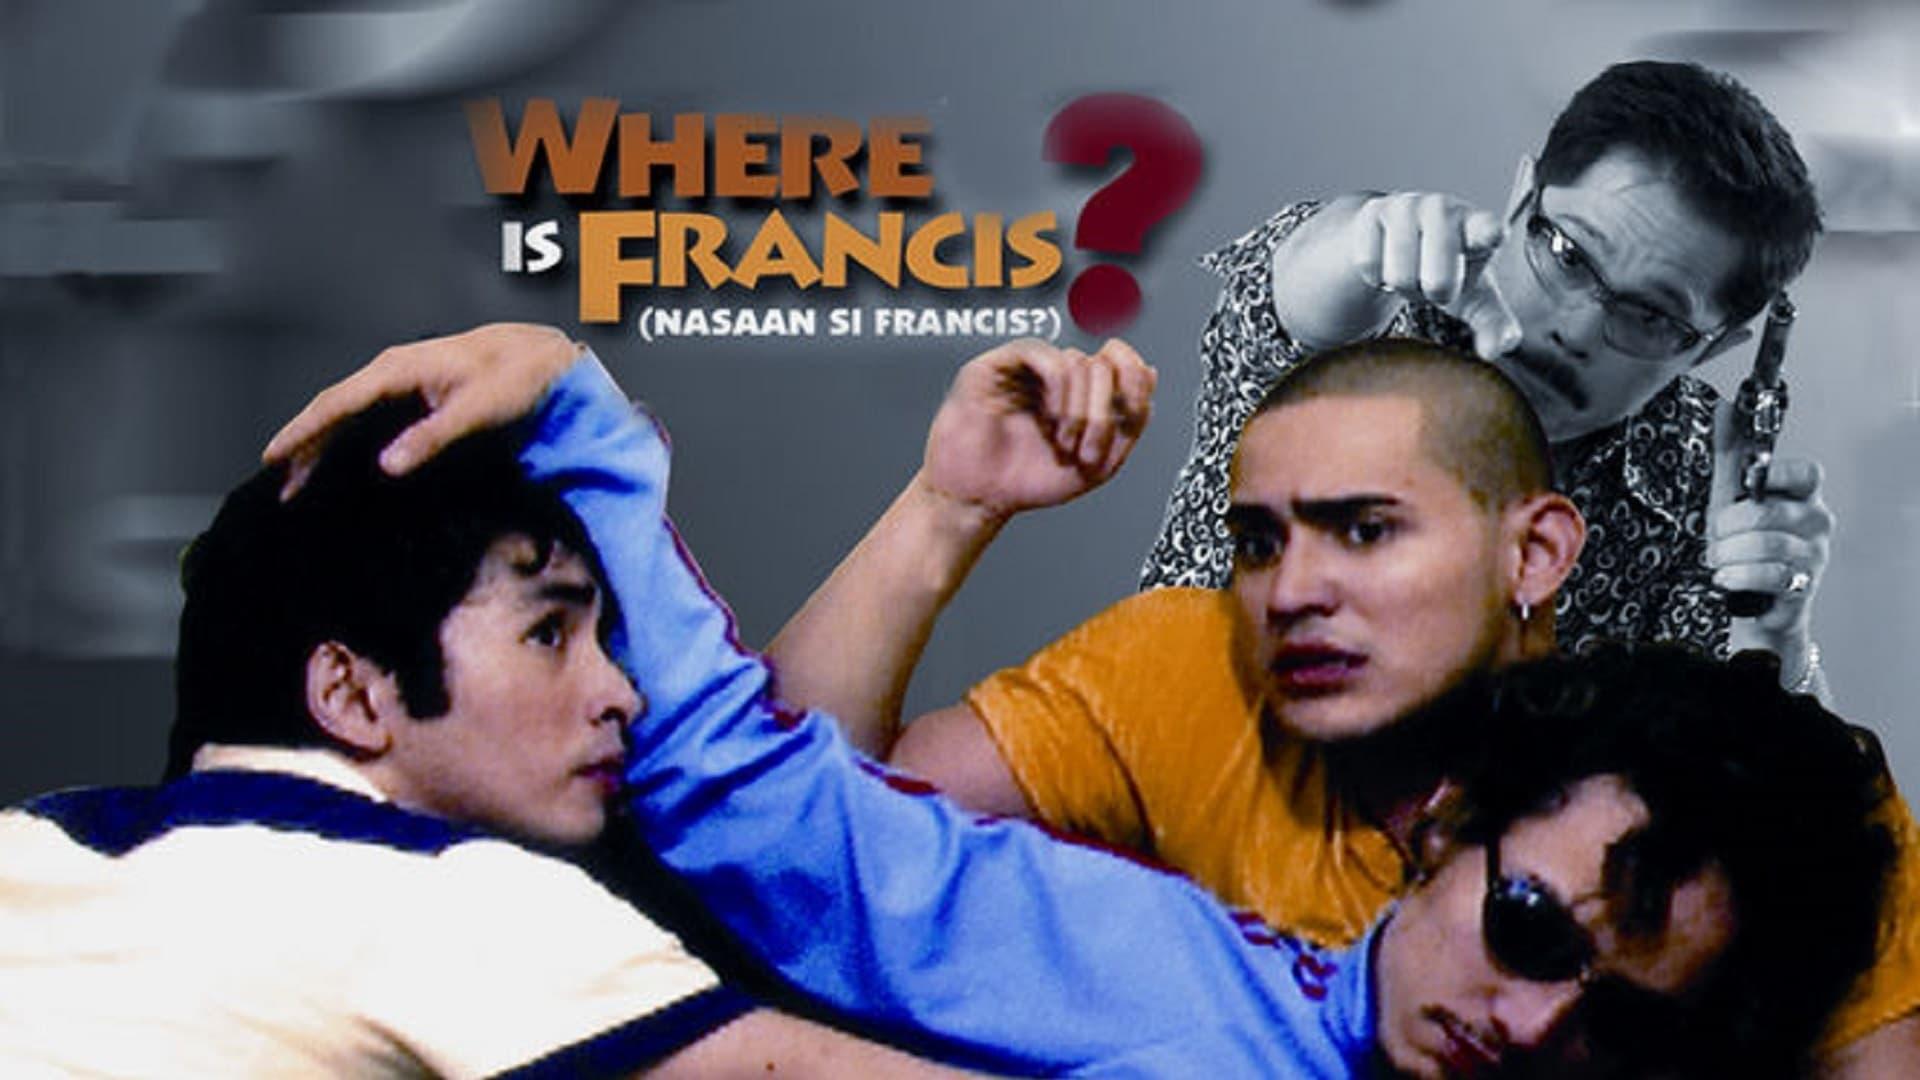 Where Is Francis? backdrop